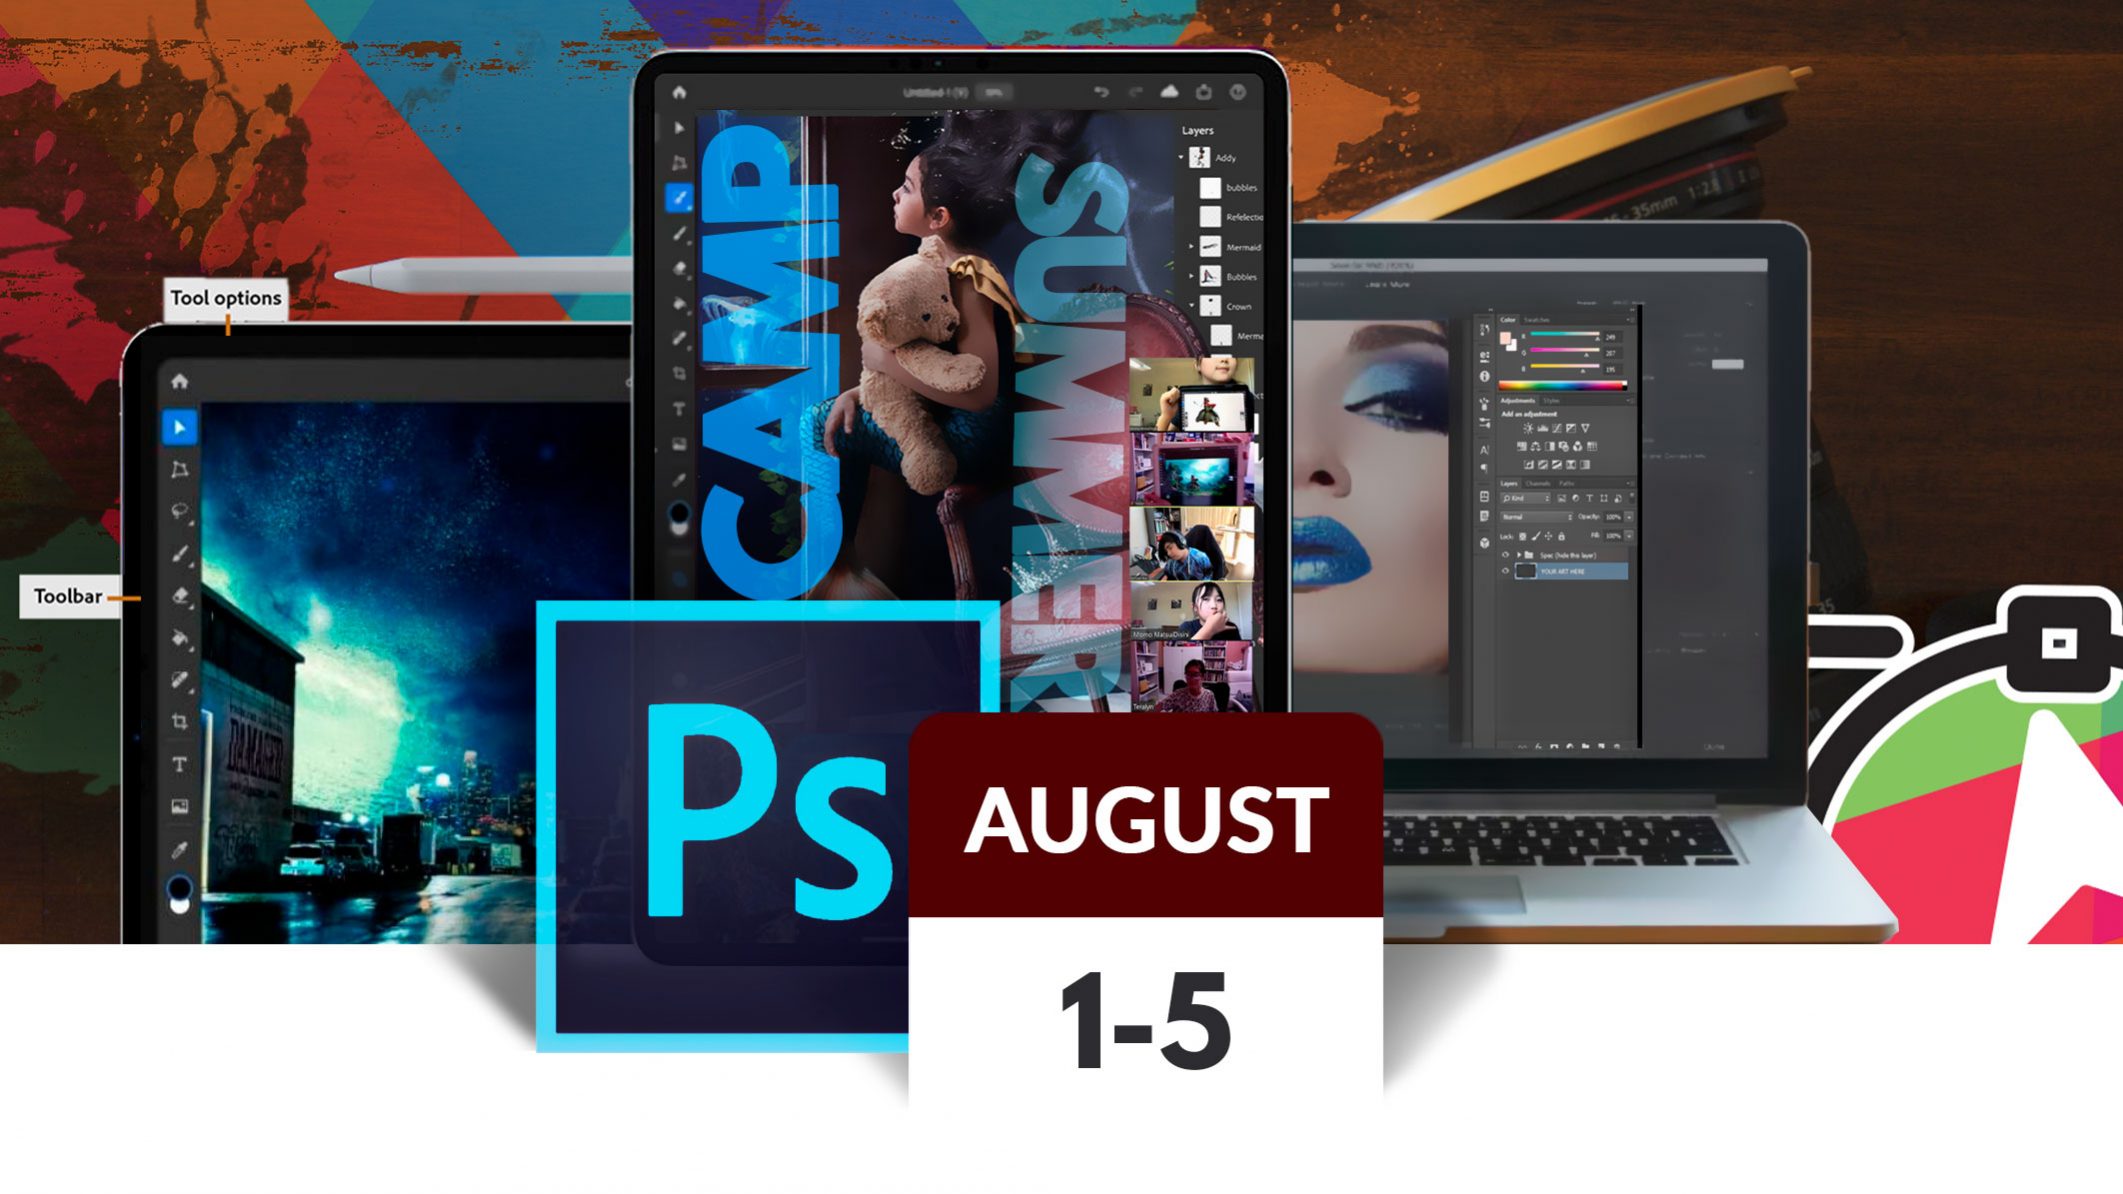 In 5 days Summer Camp, teenagers will learn how to create epic posters, business cards, videos, gif animated, YouTube channel arts and more... using Photoshop connected from iPad or Desktop. Online/Live Classes.